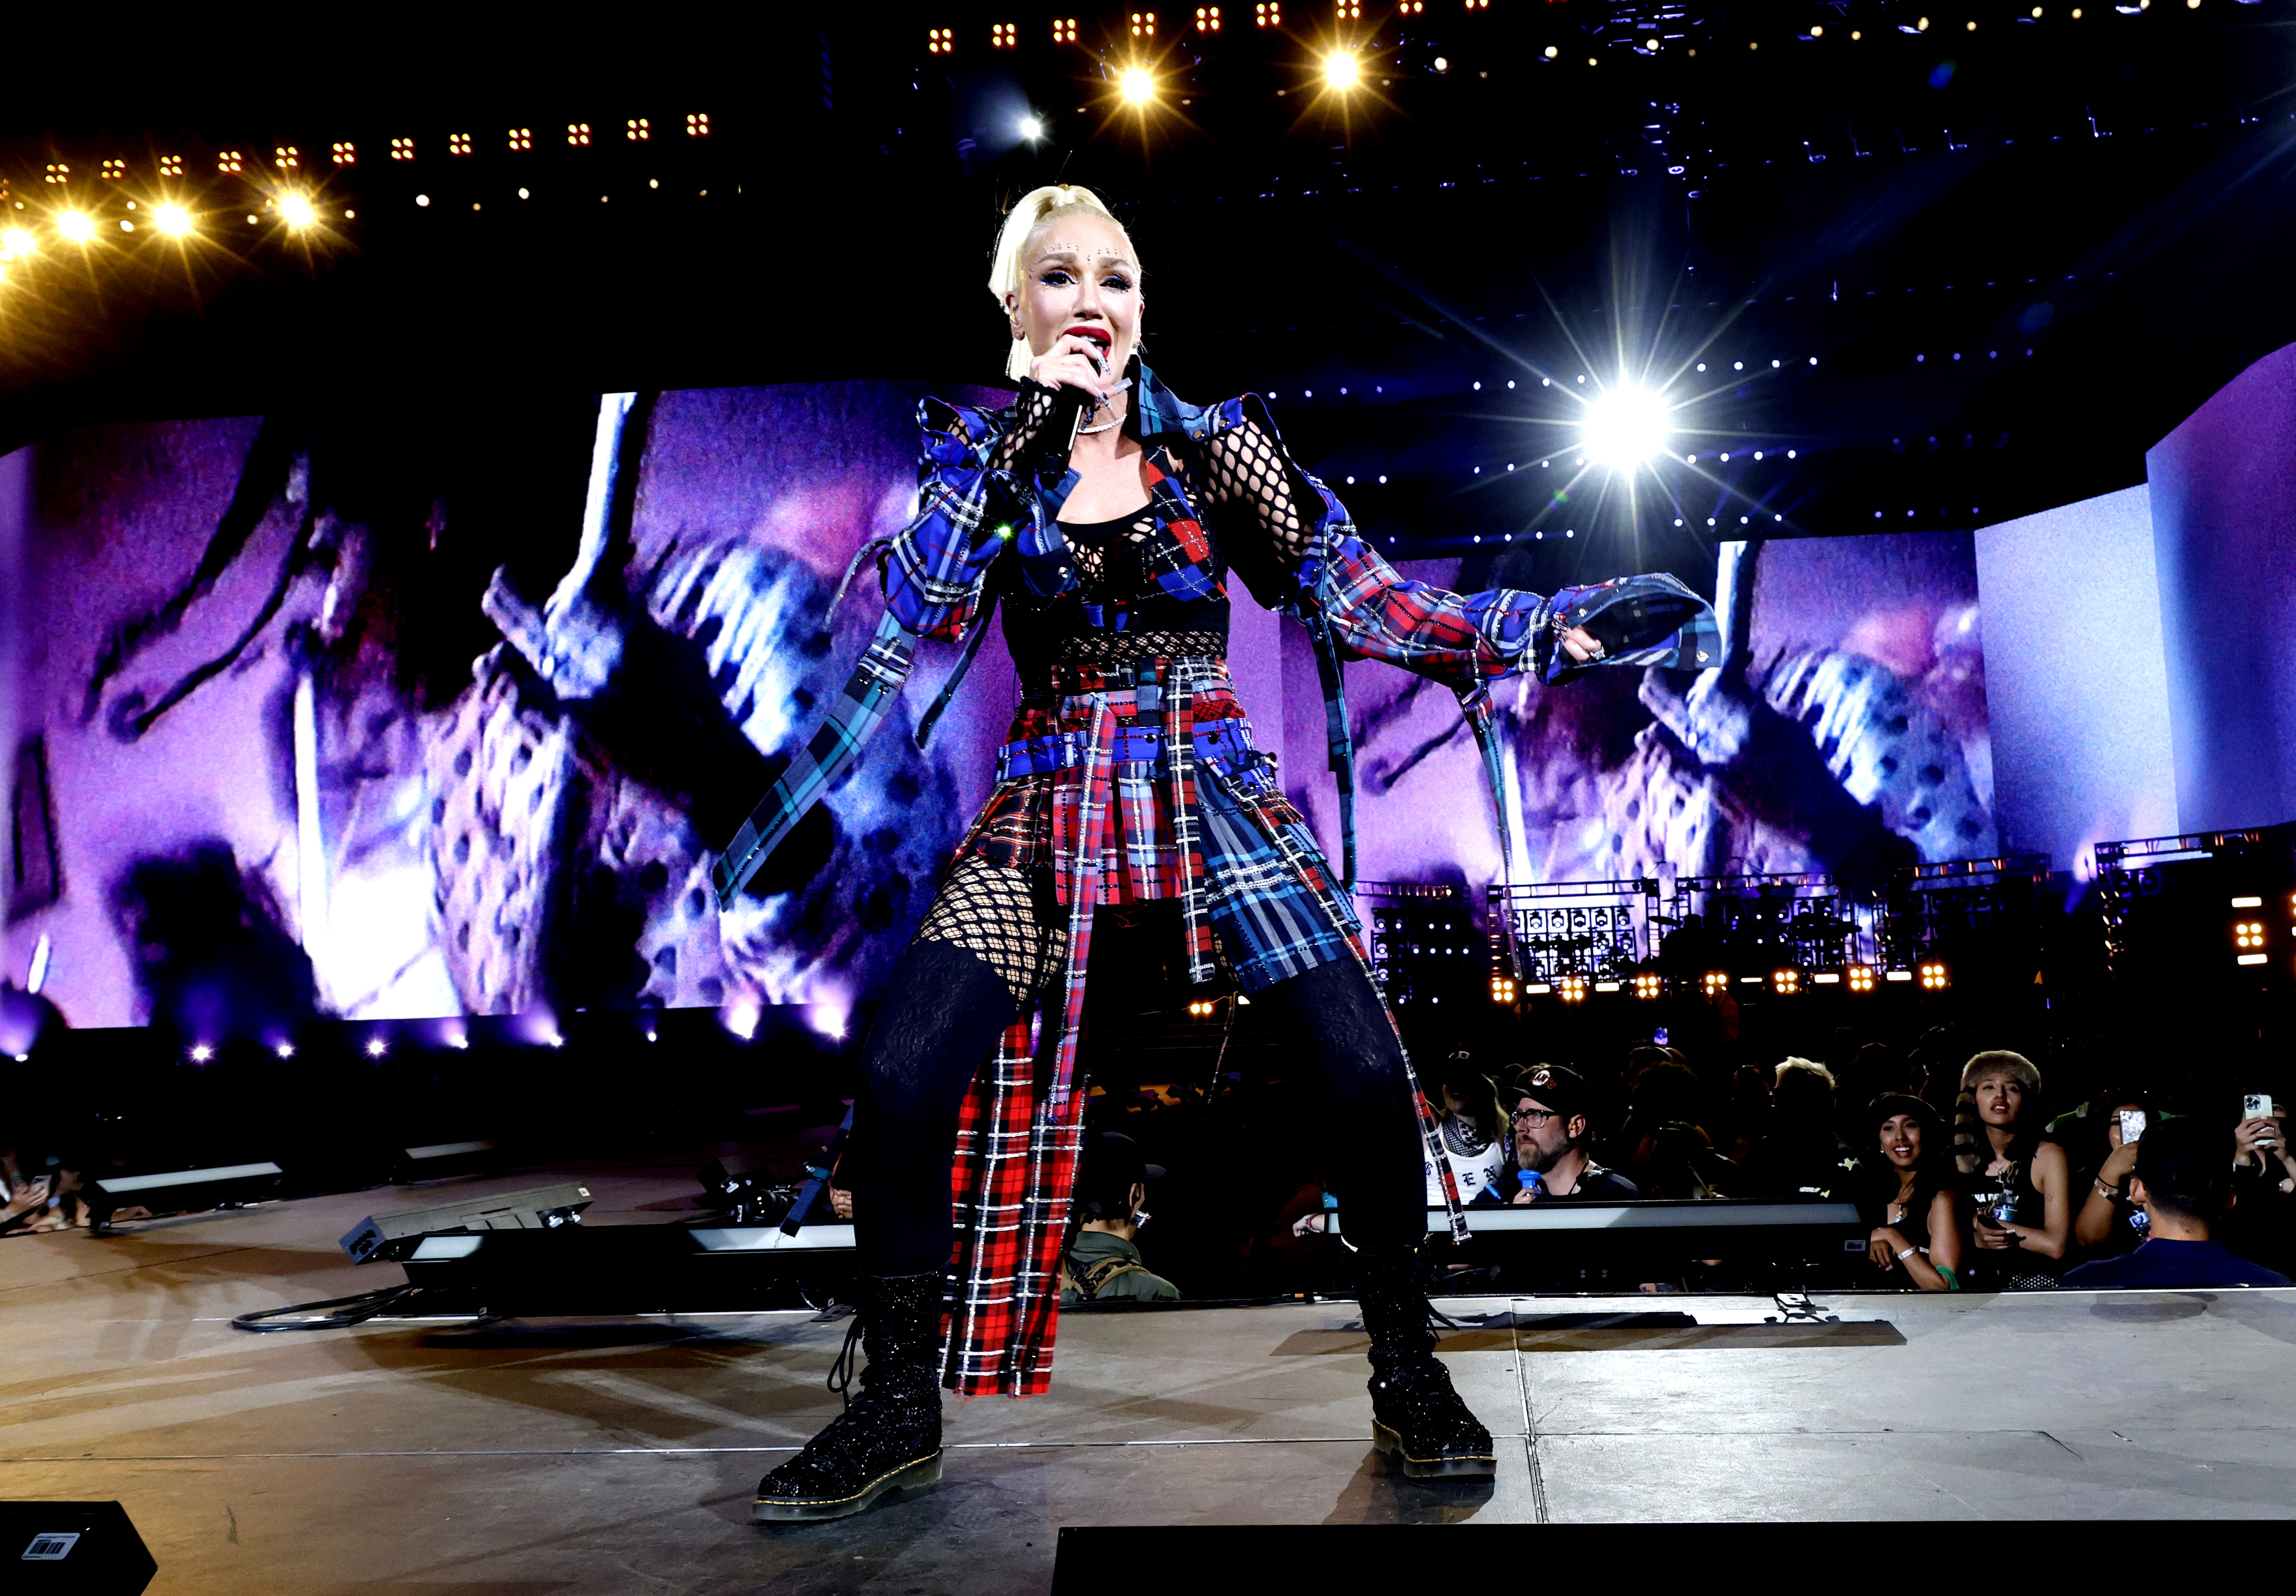 Gwen reunited with No Doubt at Coachella